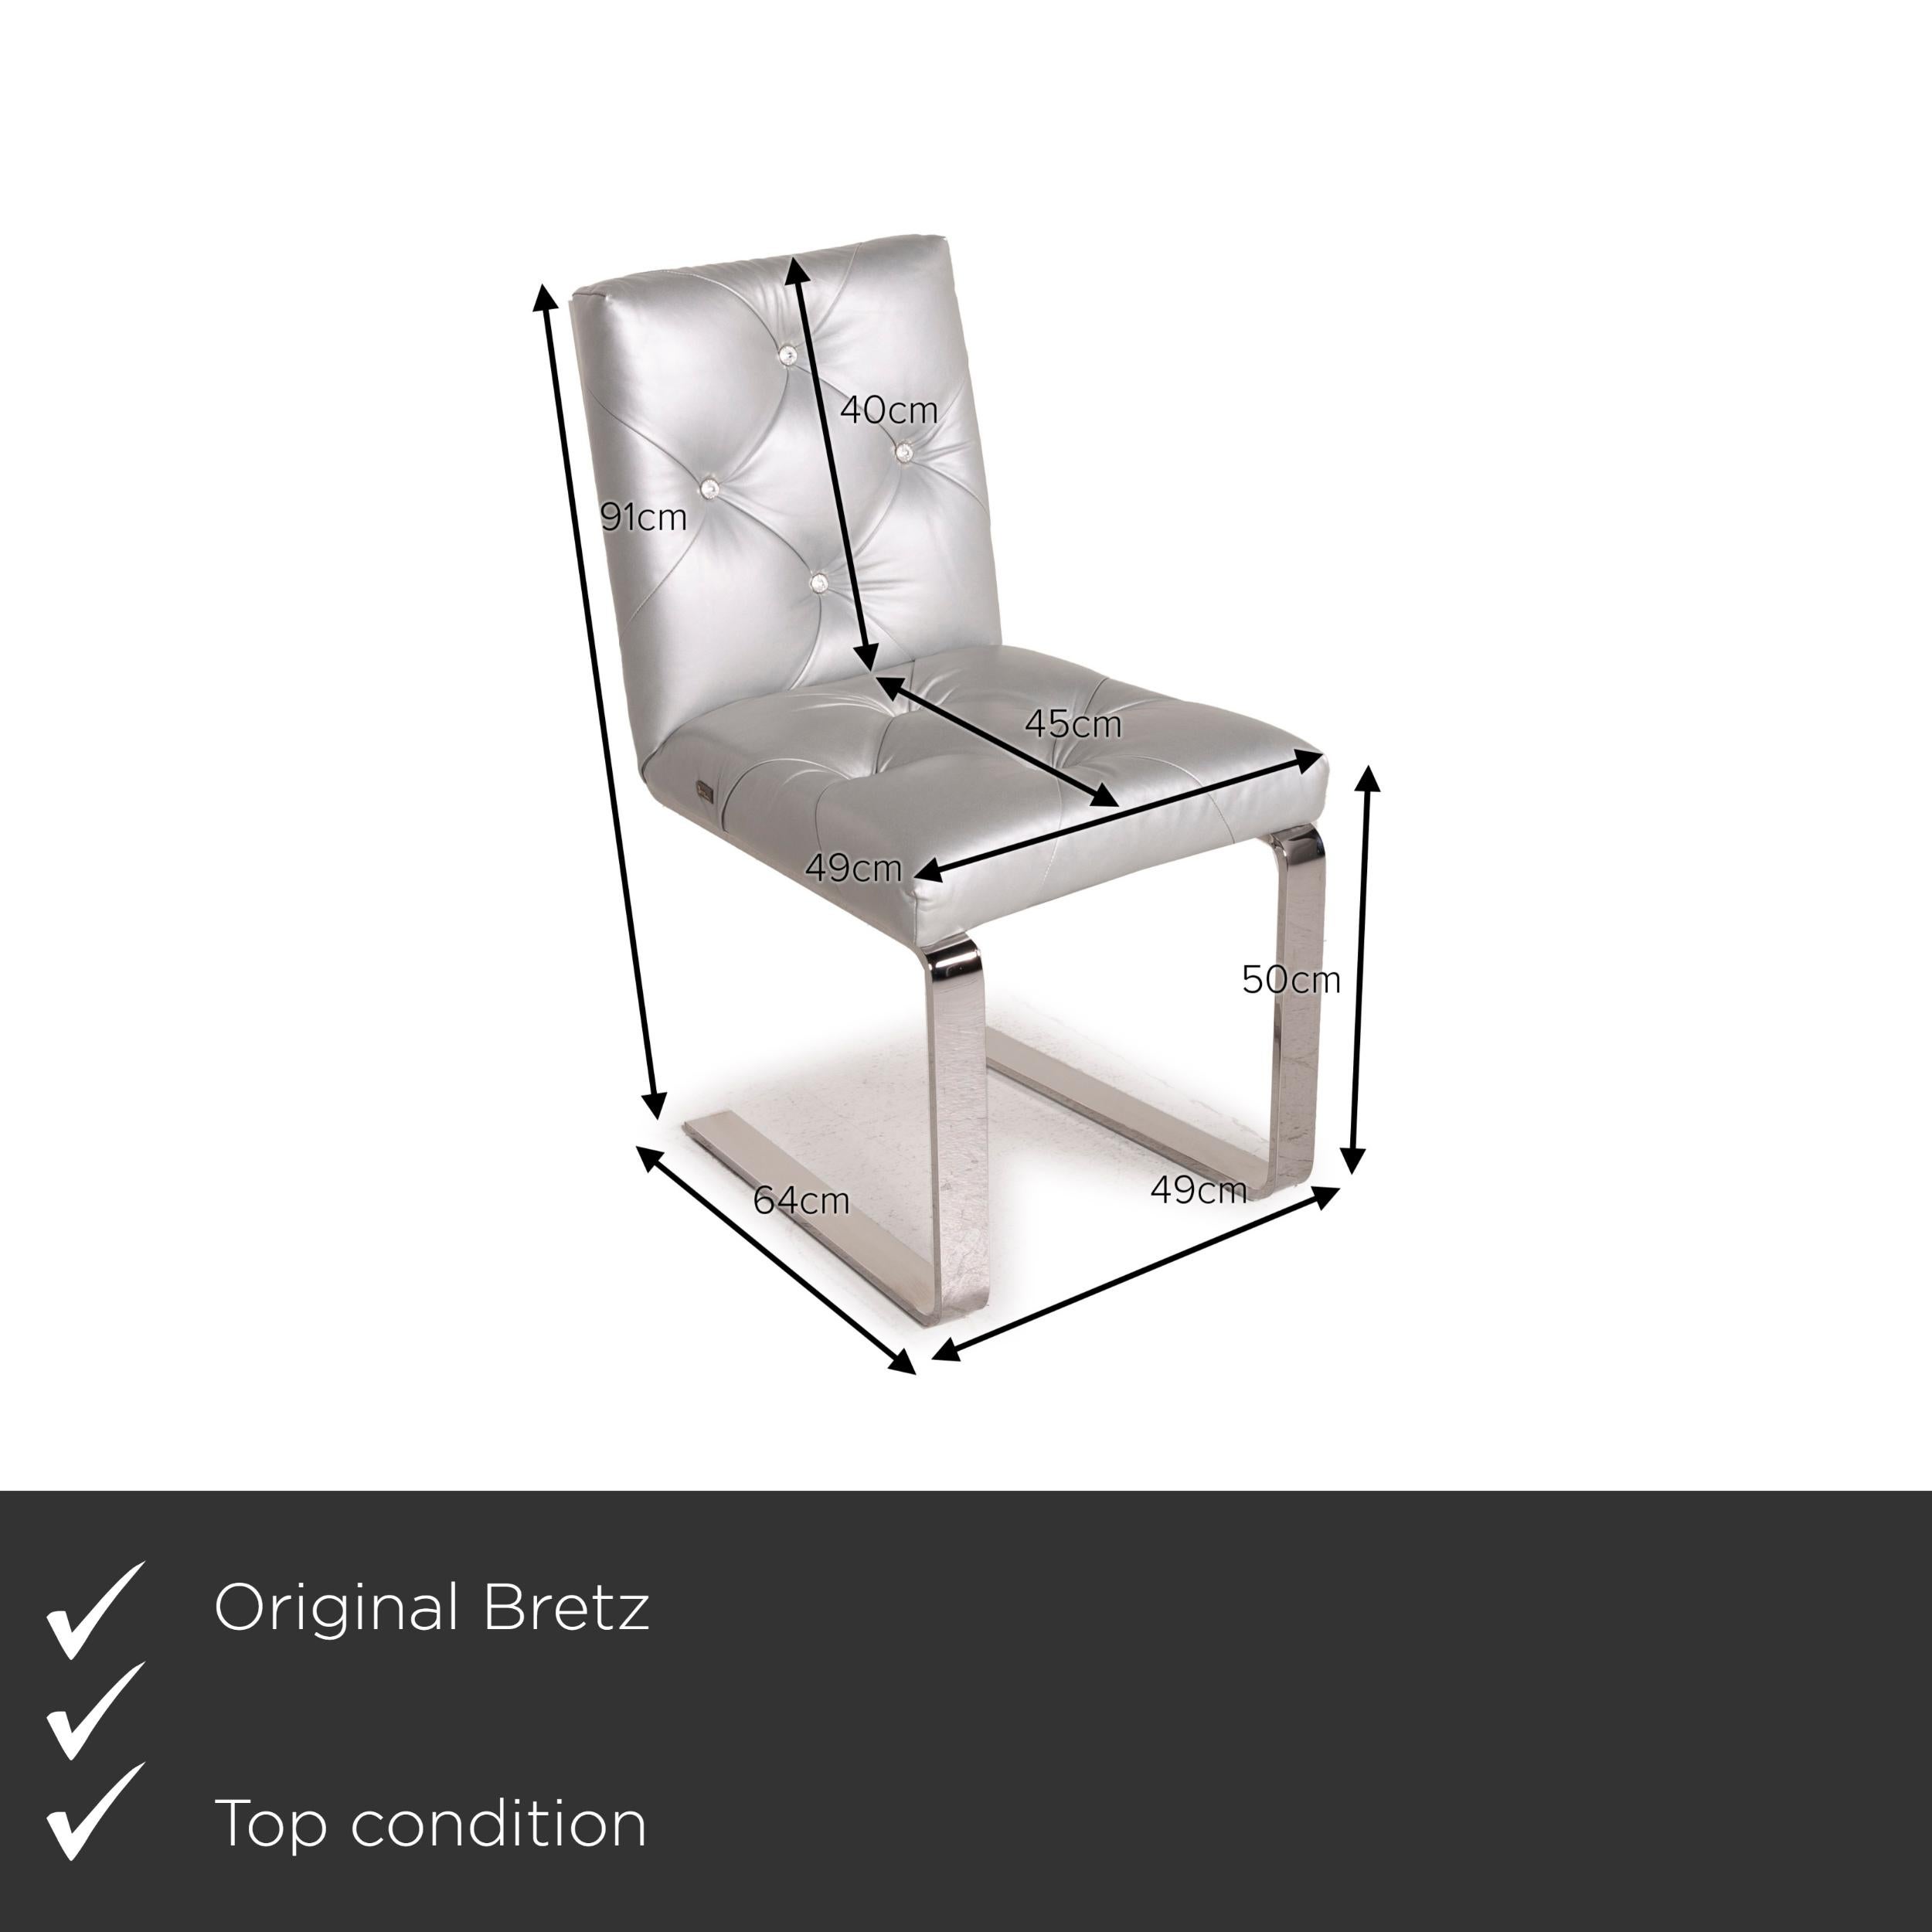 We present to you a Bretz Marilyn leather chair silver chrome.


 Product measurements in centimeters:
 

Depth: 64
Width: 49
Height: 91
Seat height: 50
Rest height:
Seat depth: 45
Seat width: 49
Back height: 40.
 